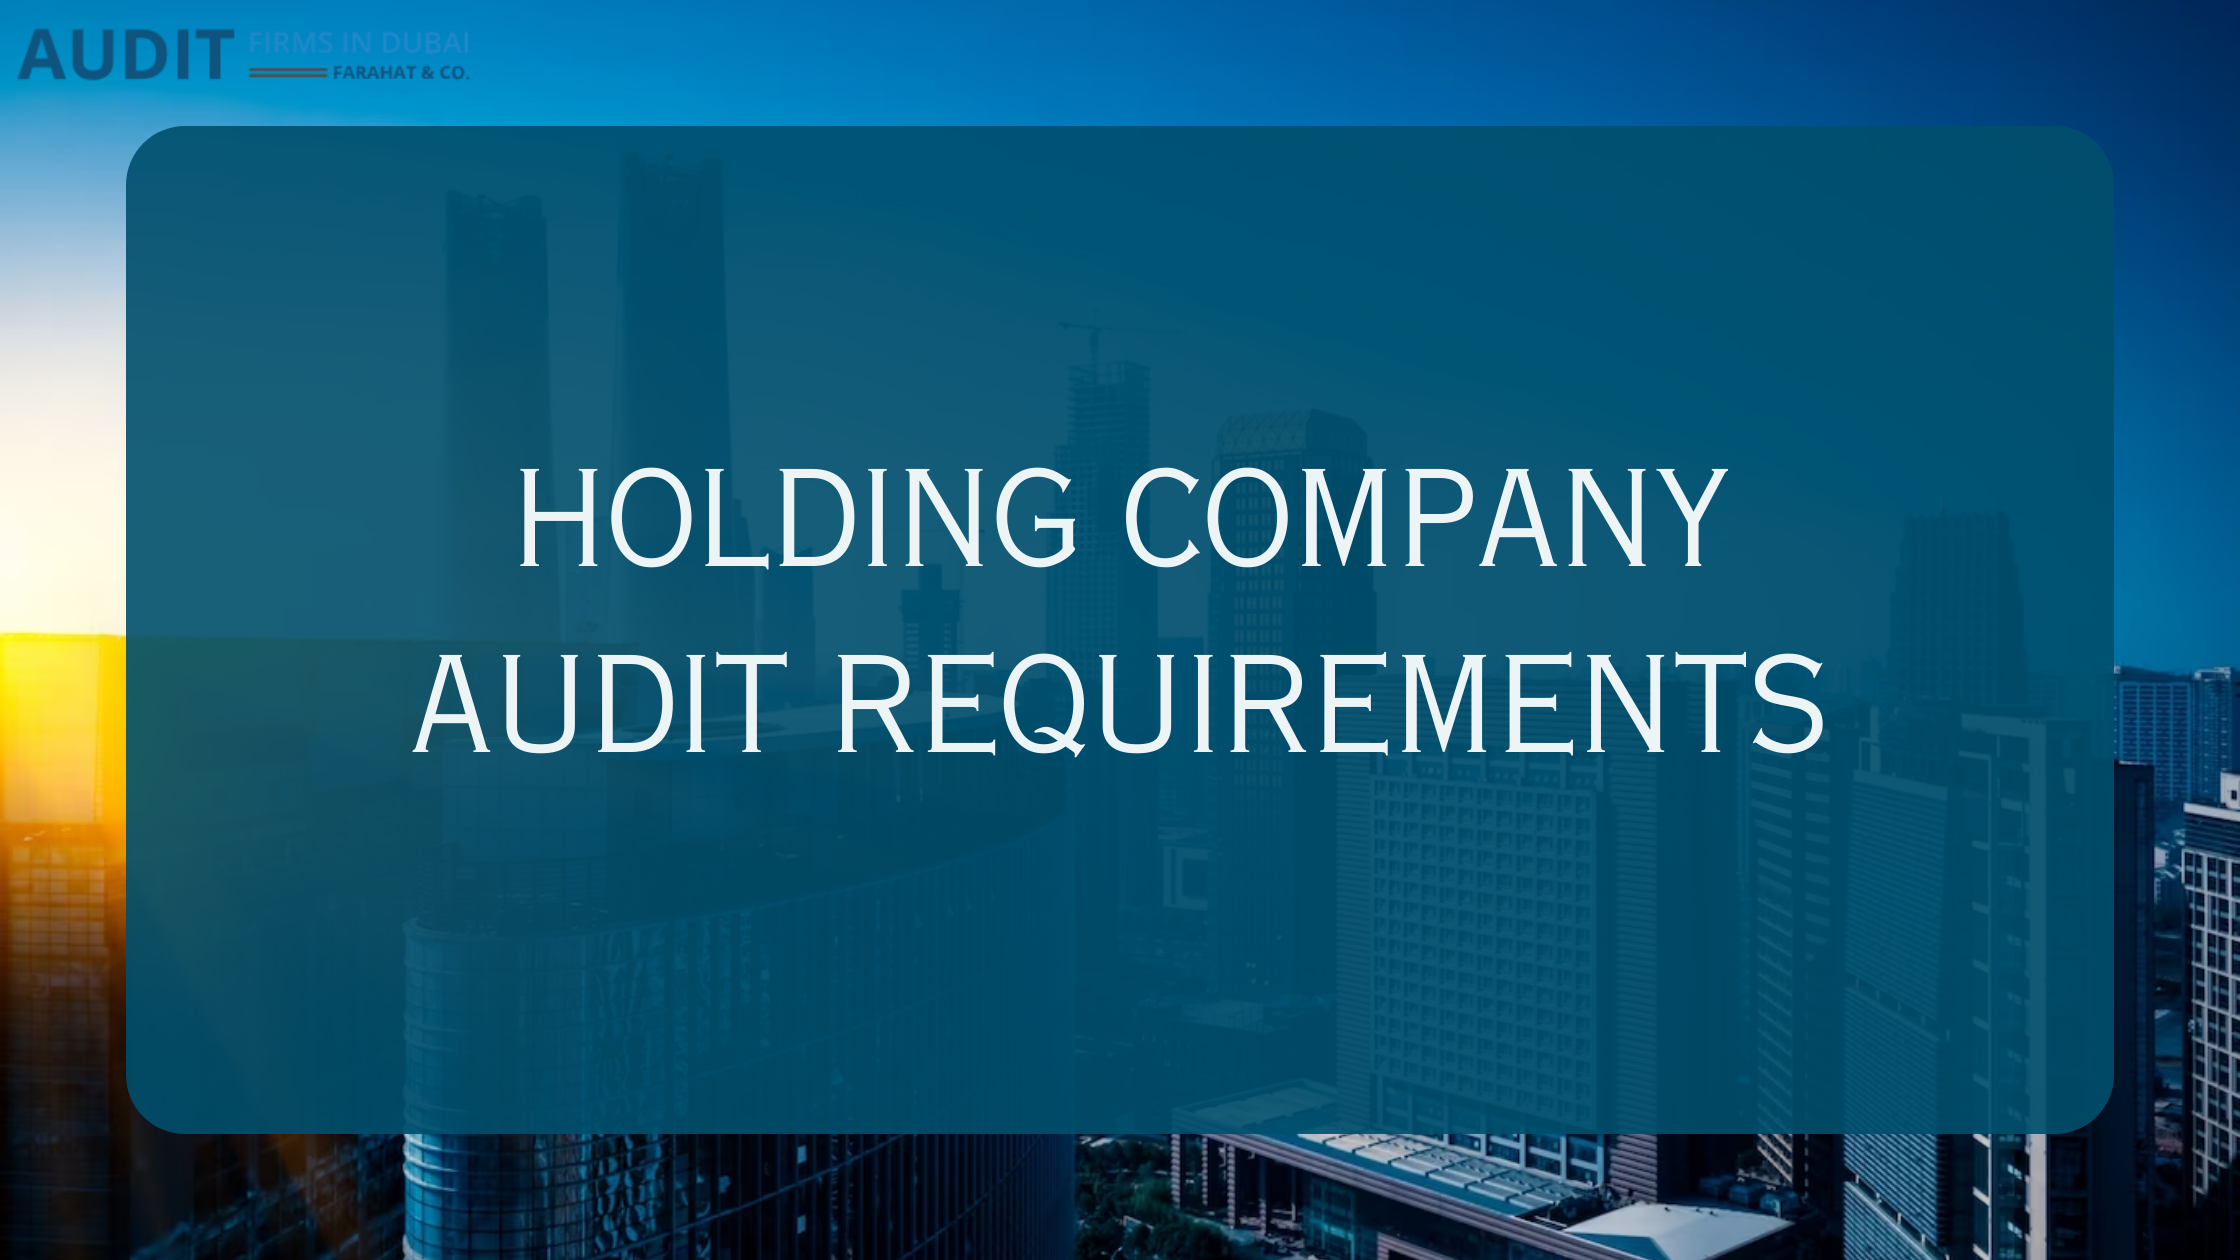 Audit requirements for a holding company